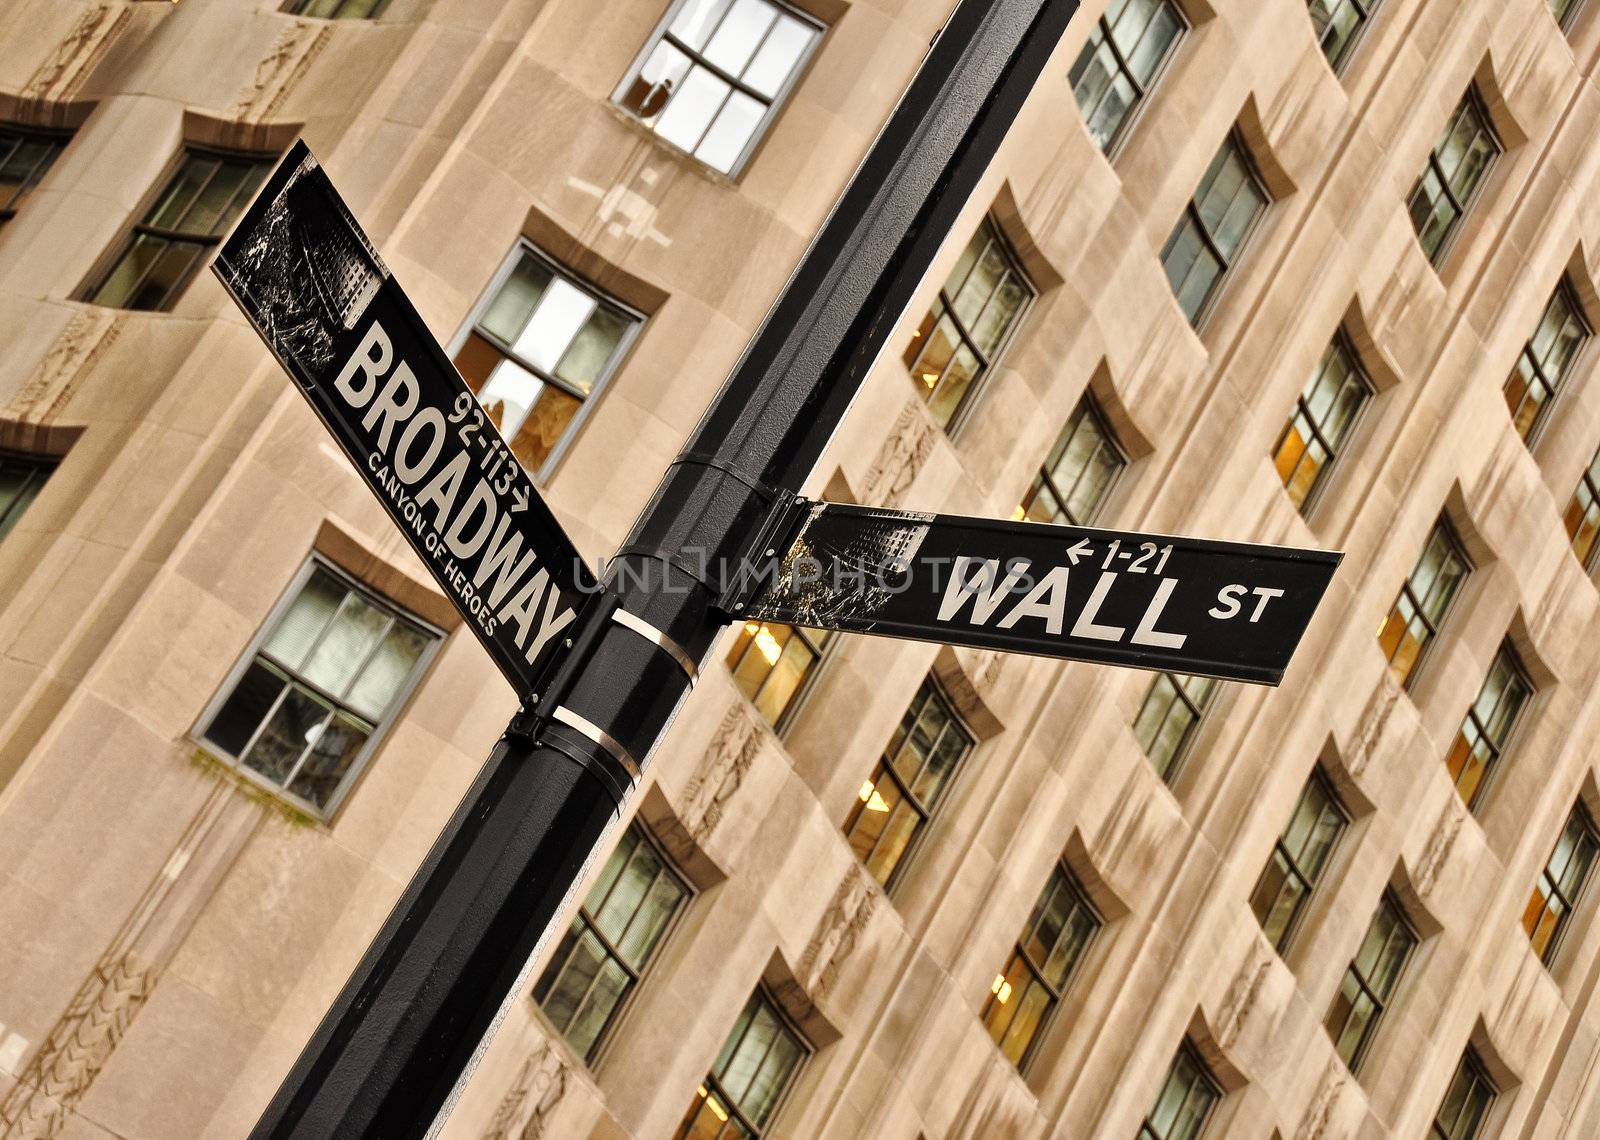 Wall street and Broadway street sign, New York, USA